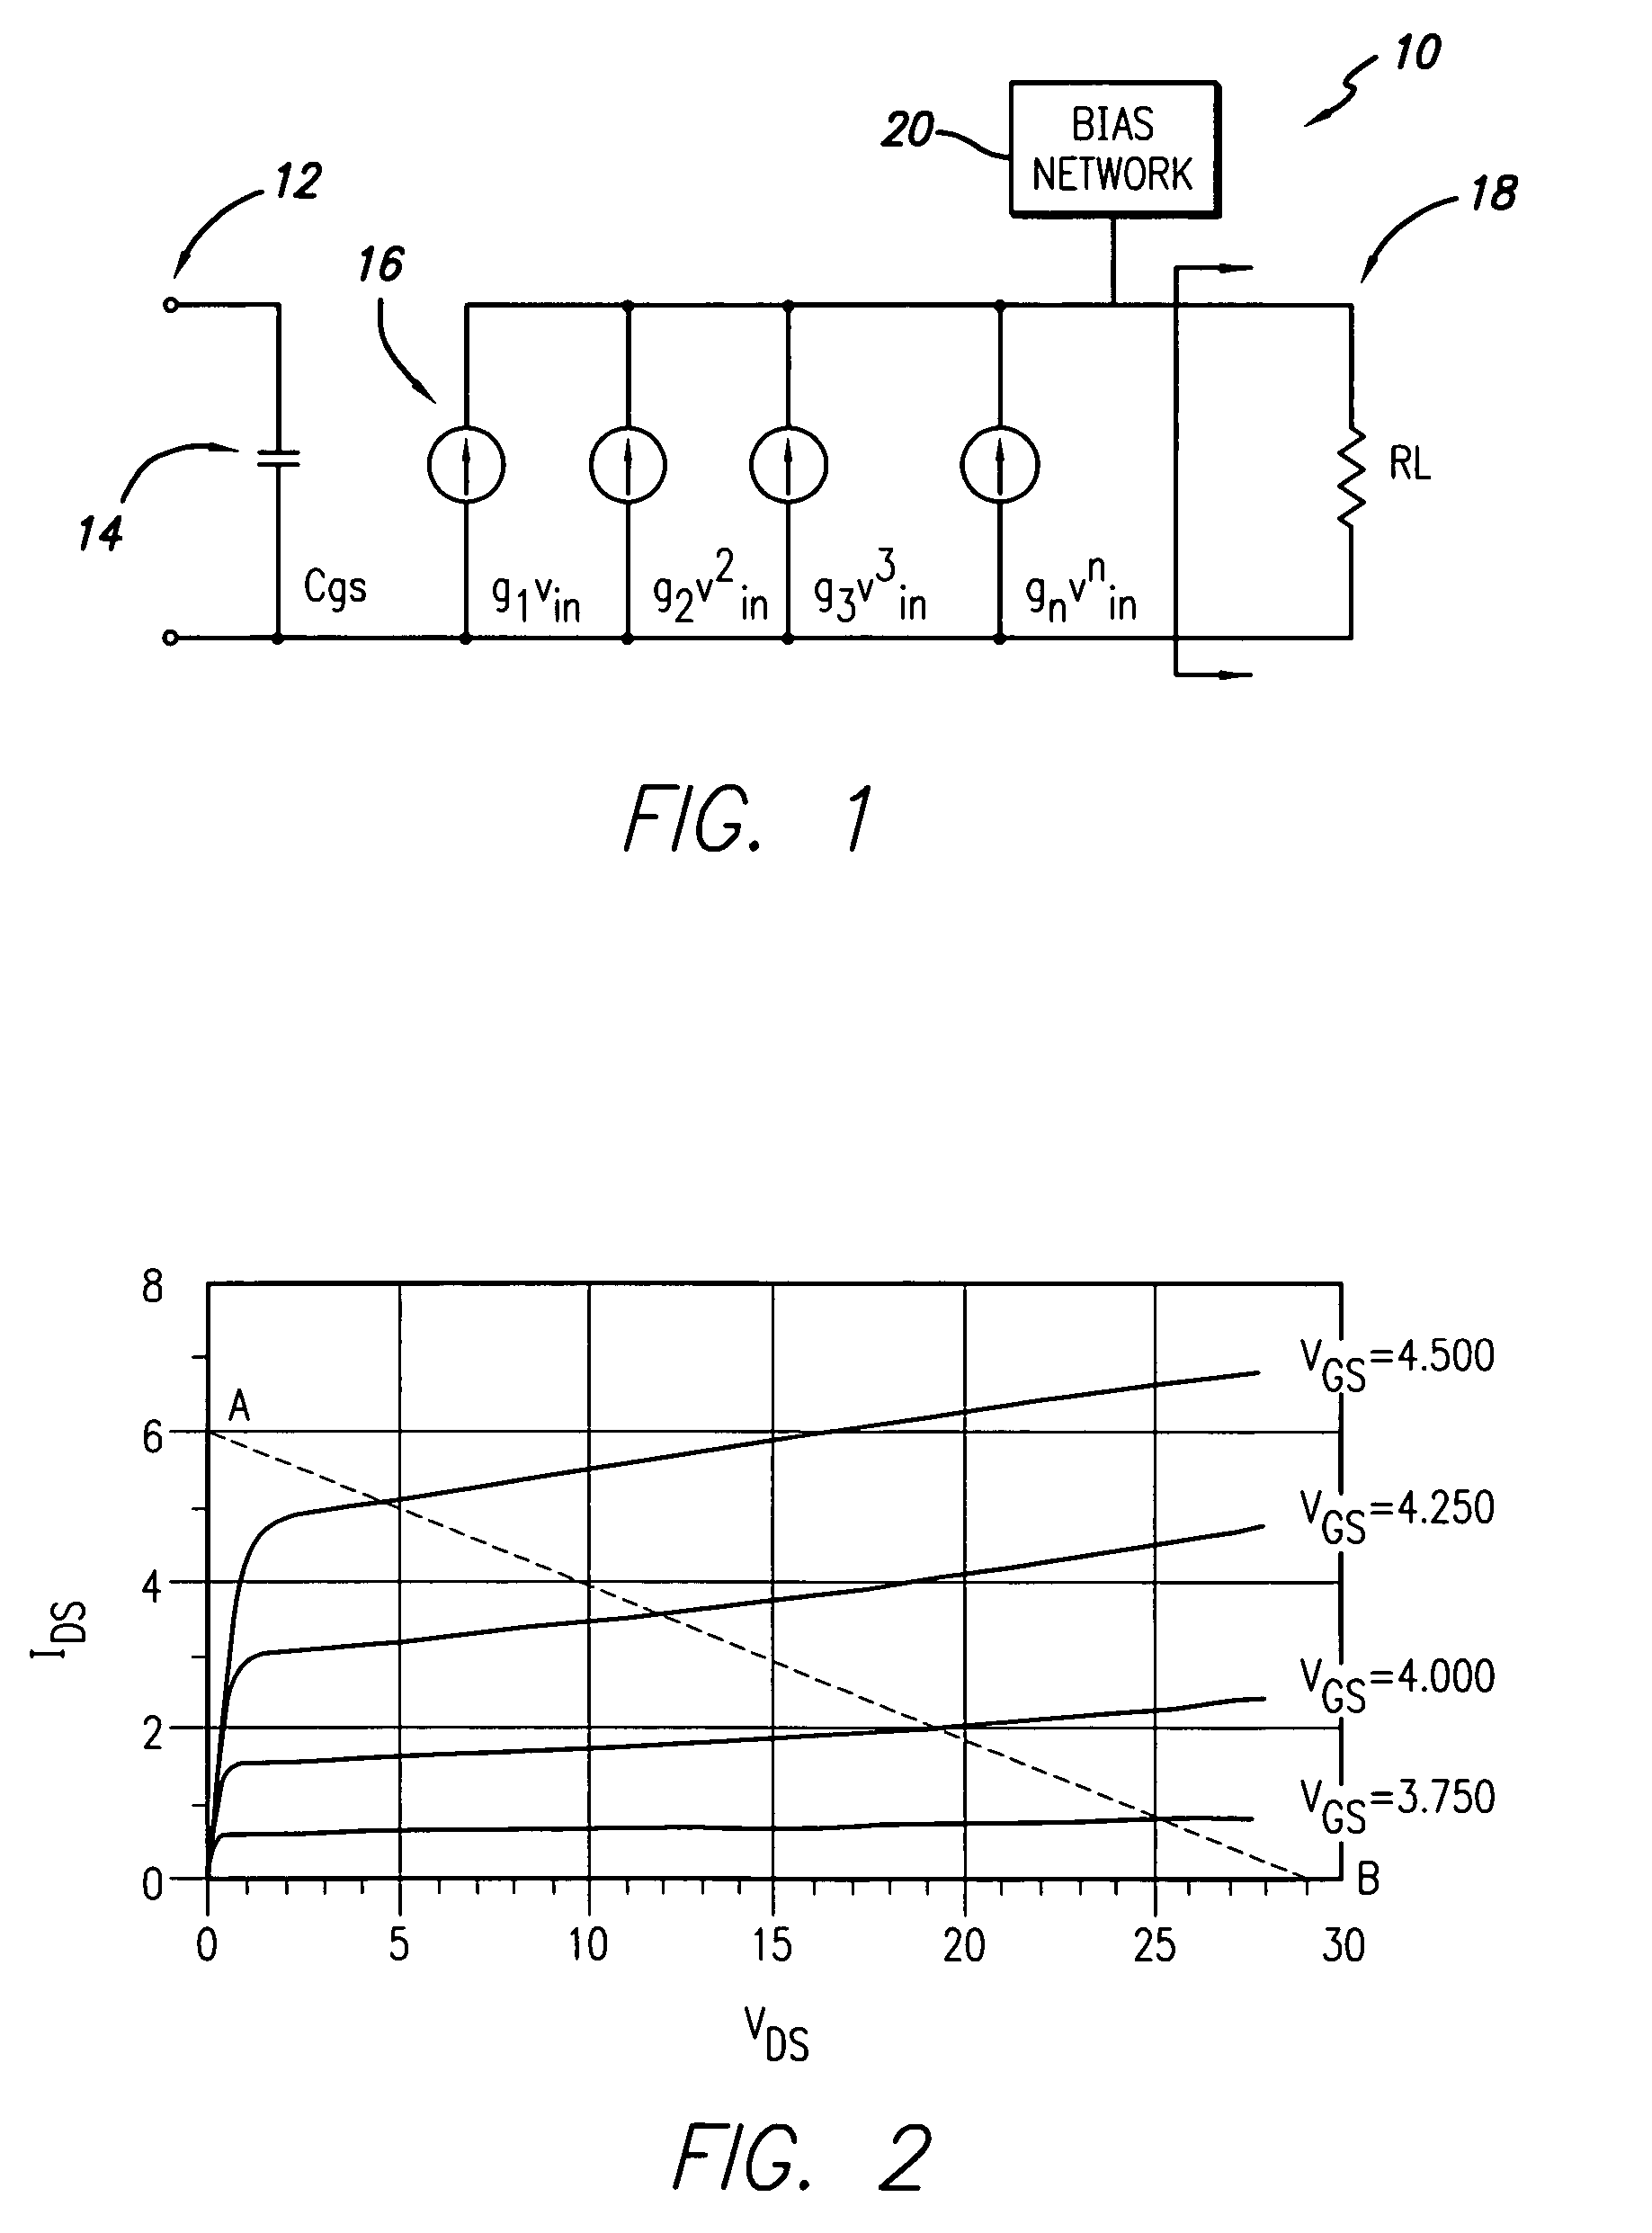 RF amplifier employing active load linearization